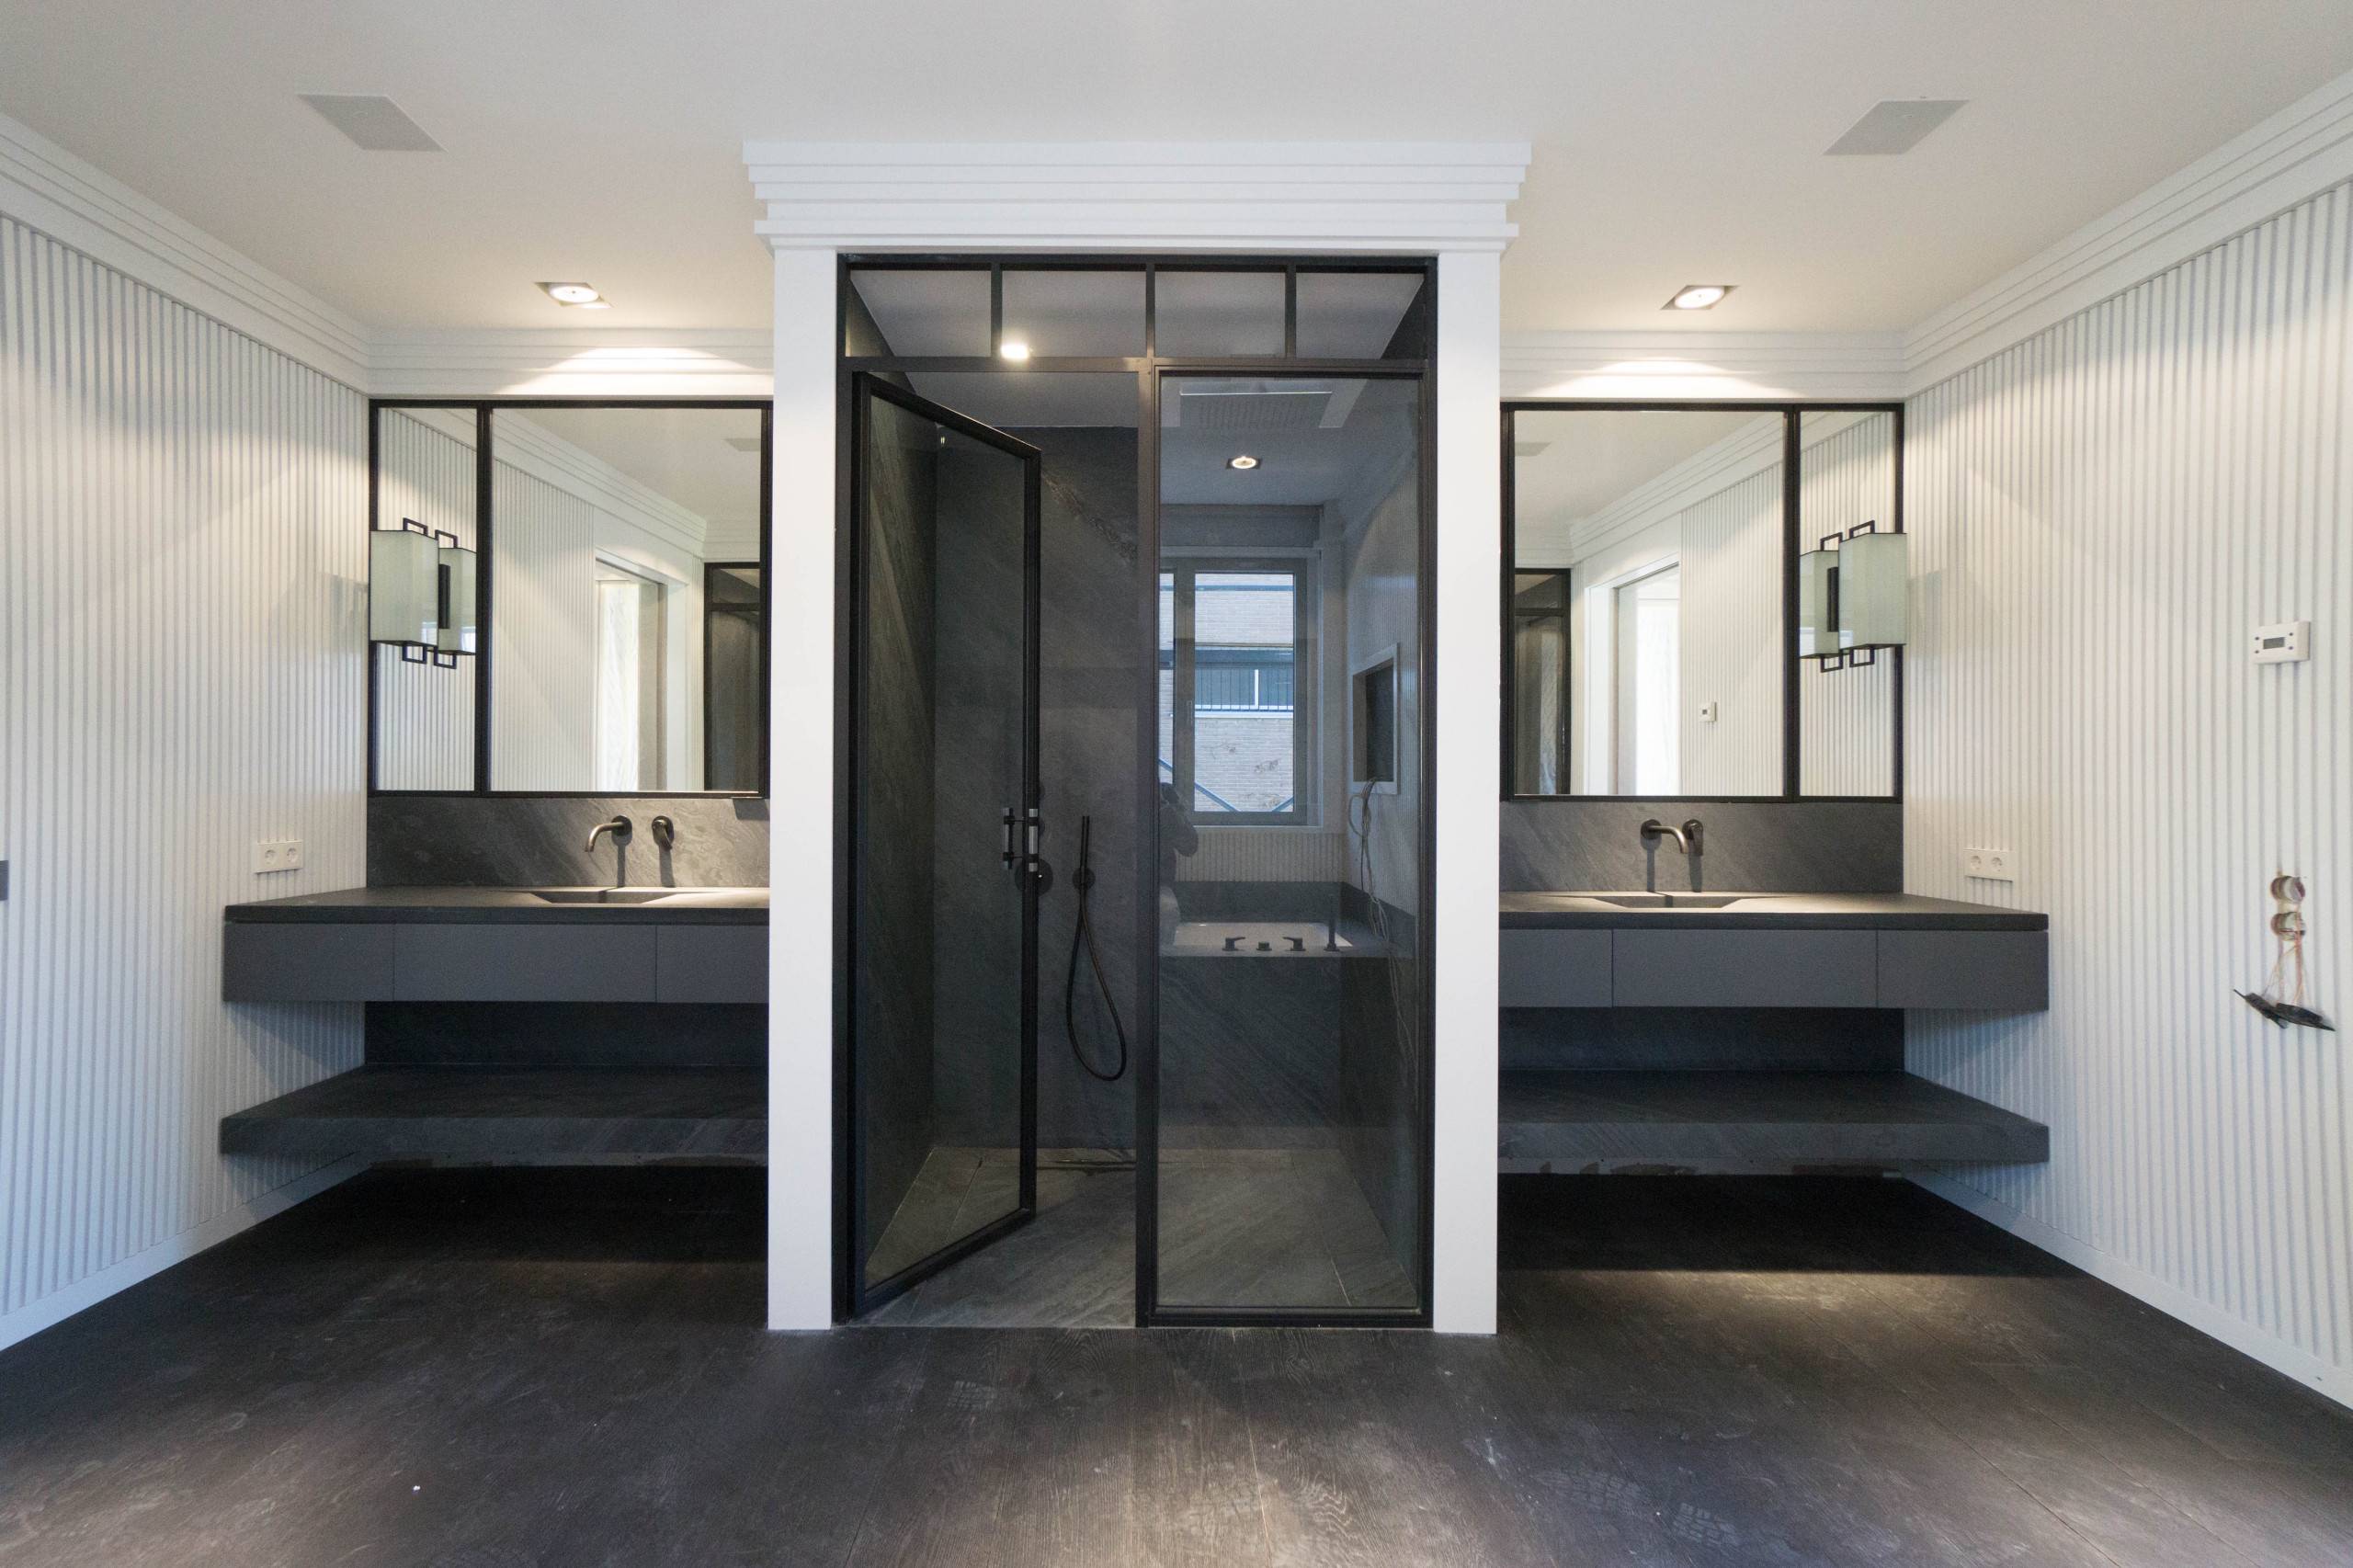 Refined and sleek bathroom design (from Houzz)